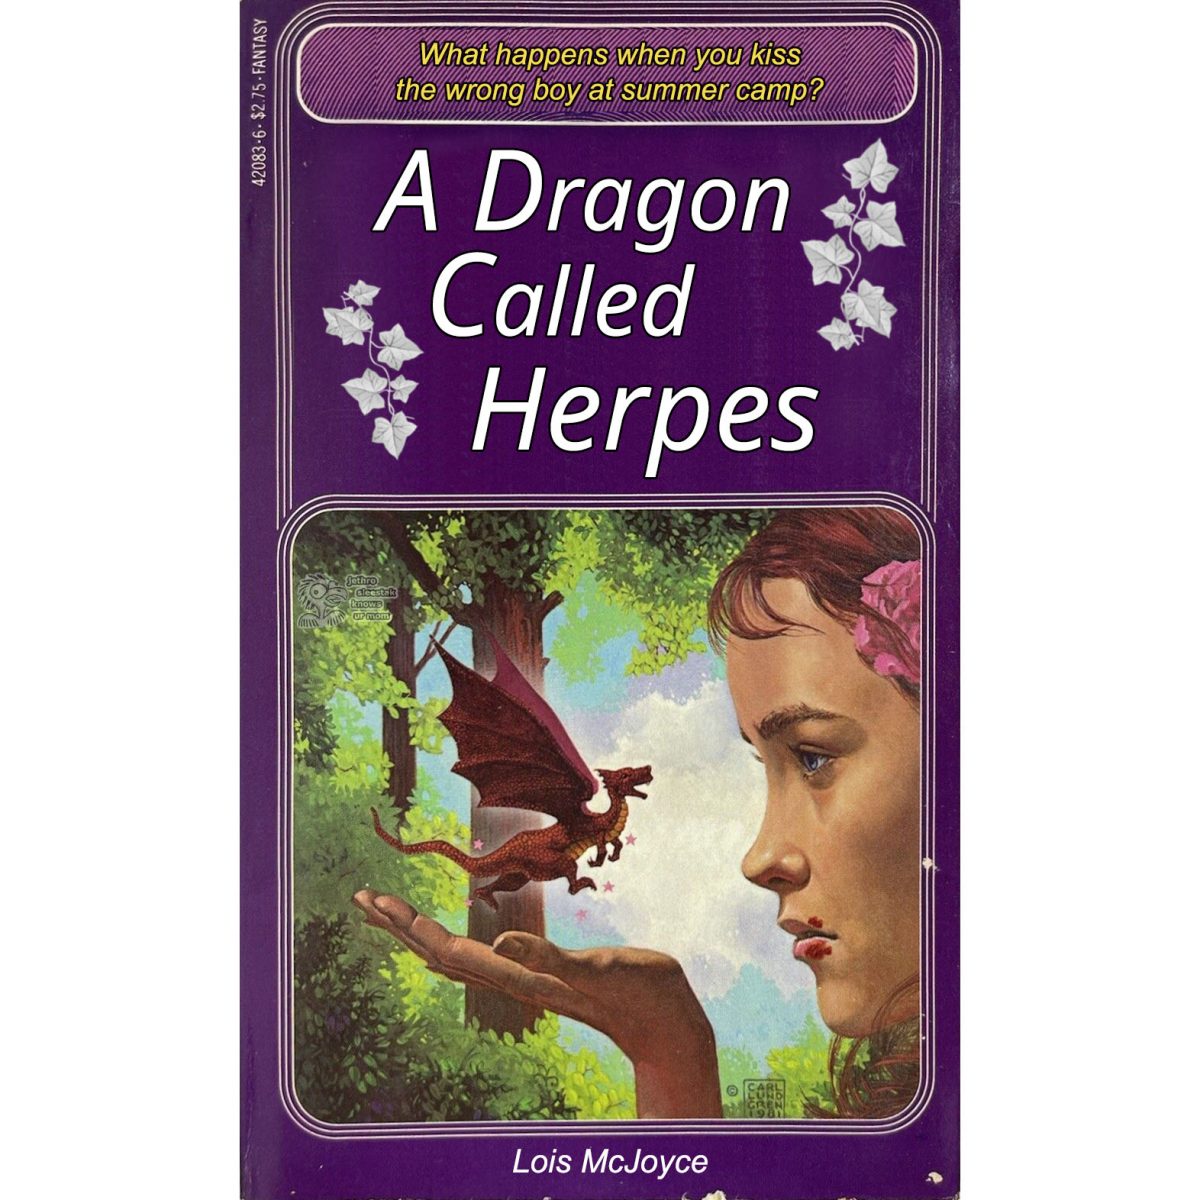 A Dragon Called Herpes